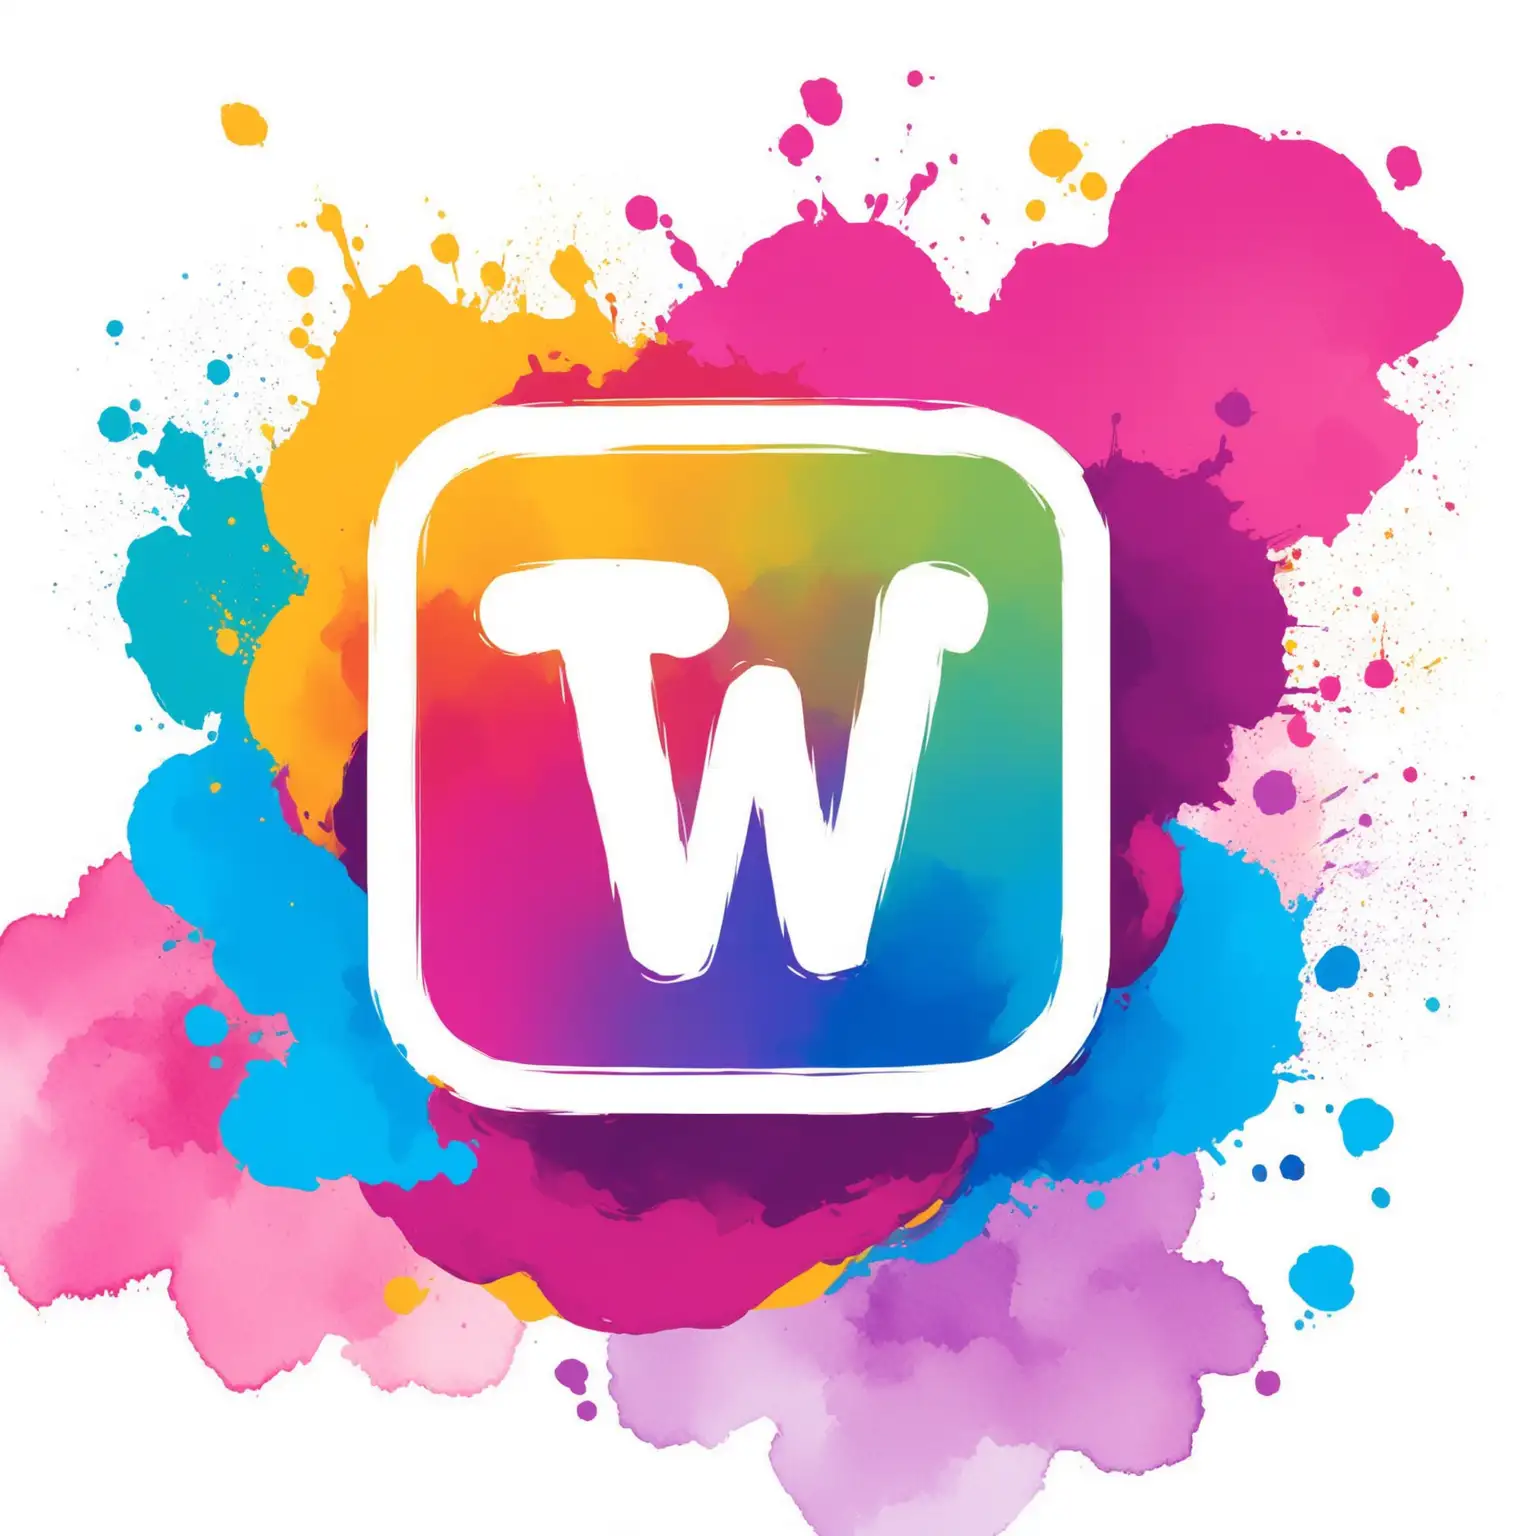 make a logo for a Instagram page name "TW" the logo should be based on holi theme 